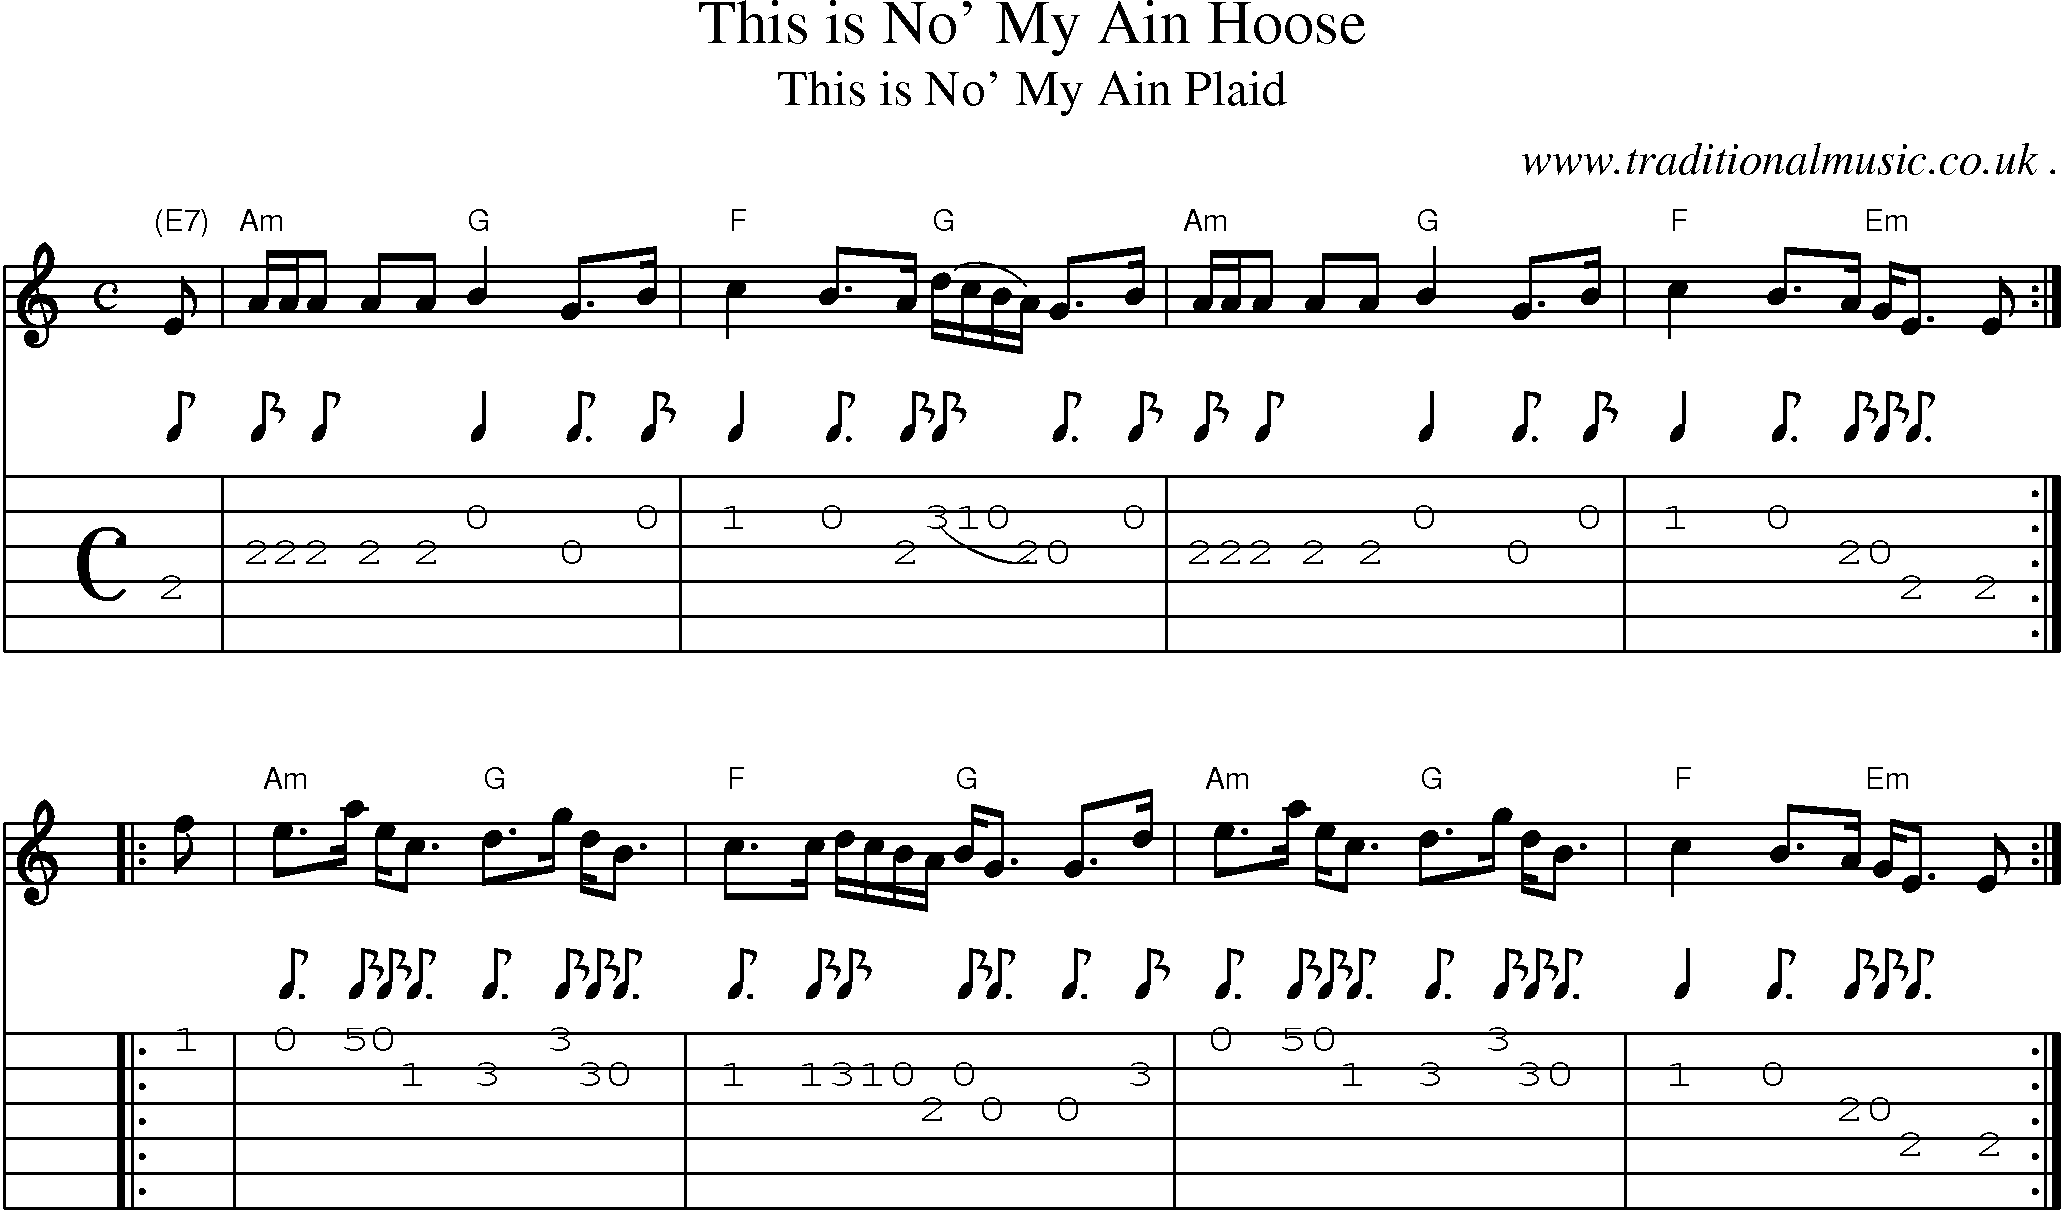 Sheet-music  score, Chords and Guitar Tabs for This Is No My Ain Hoose